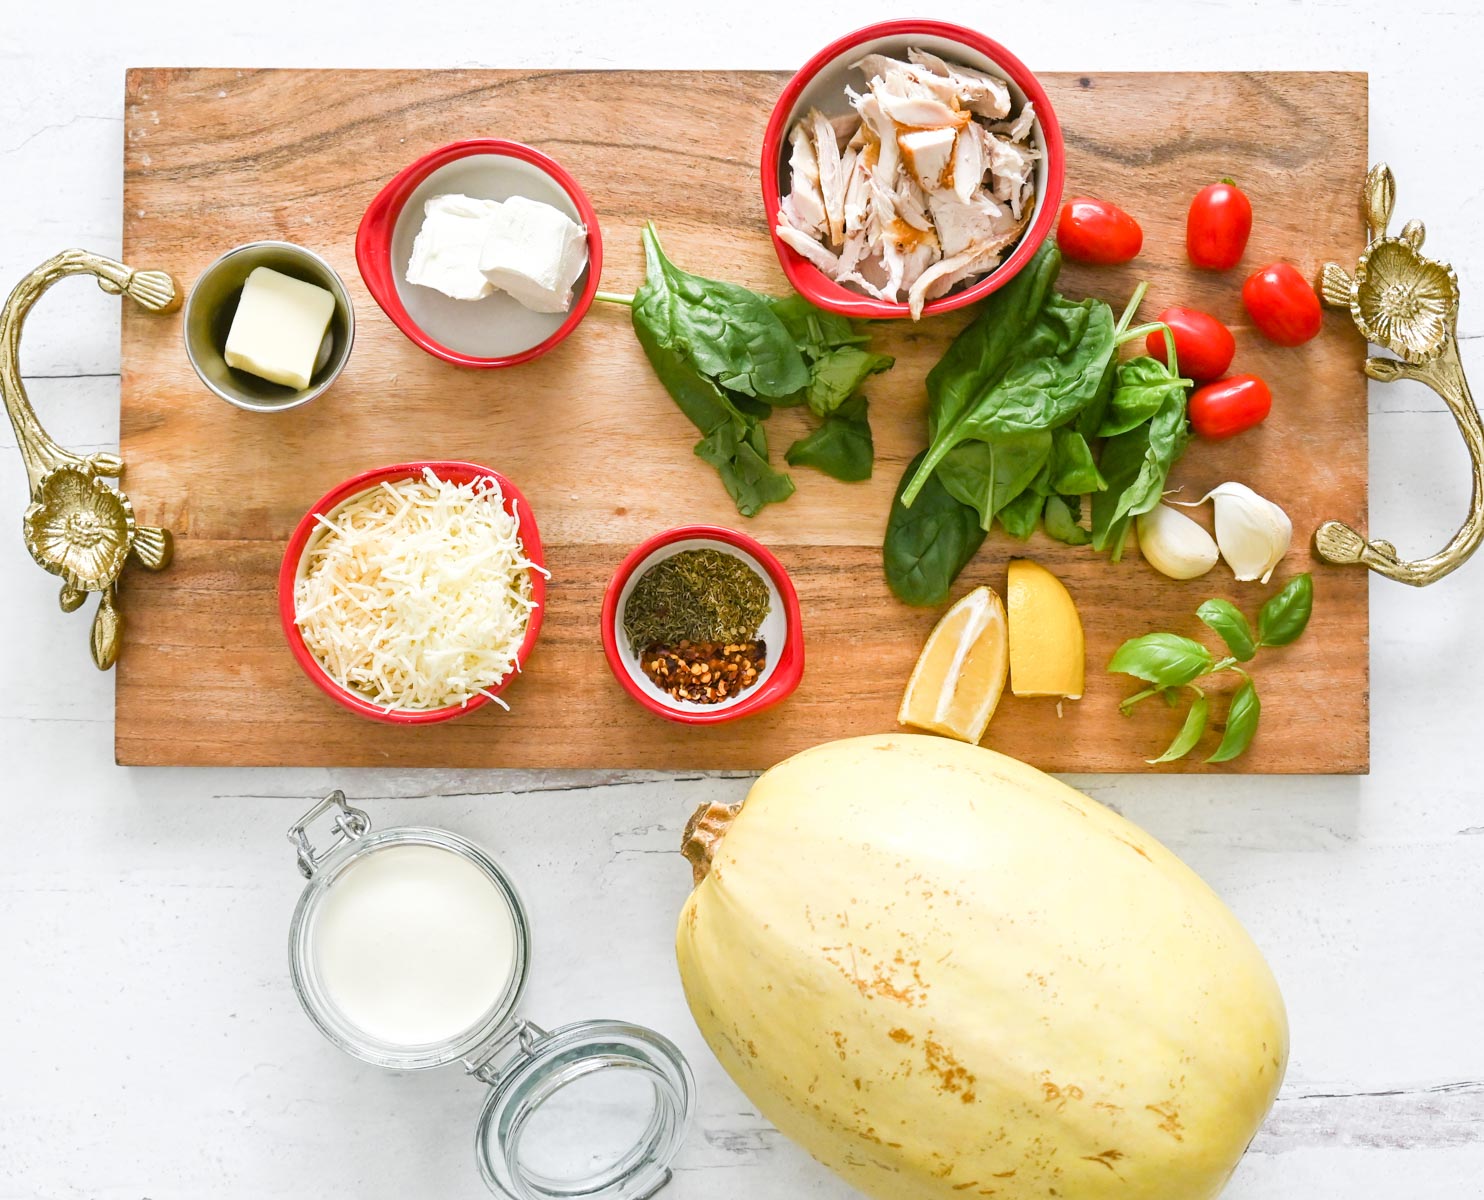 ingredients on a table with a cutting board, including spaghetti squash, cheeses, tomatoes, spinach and garlic